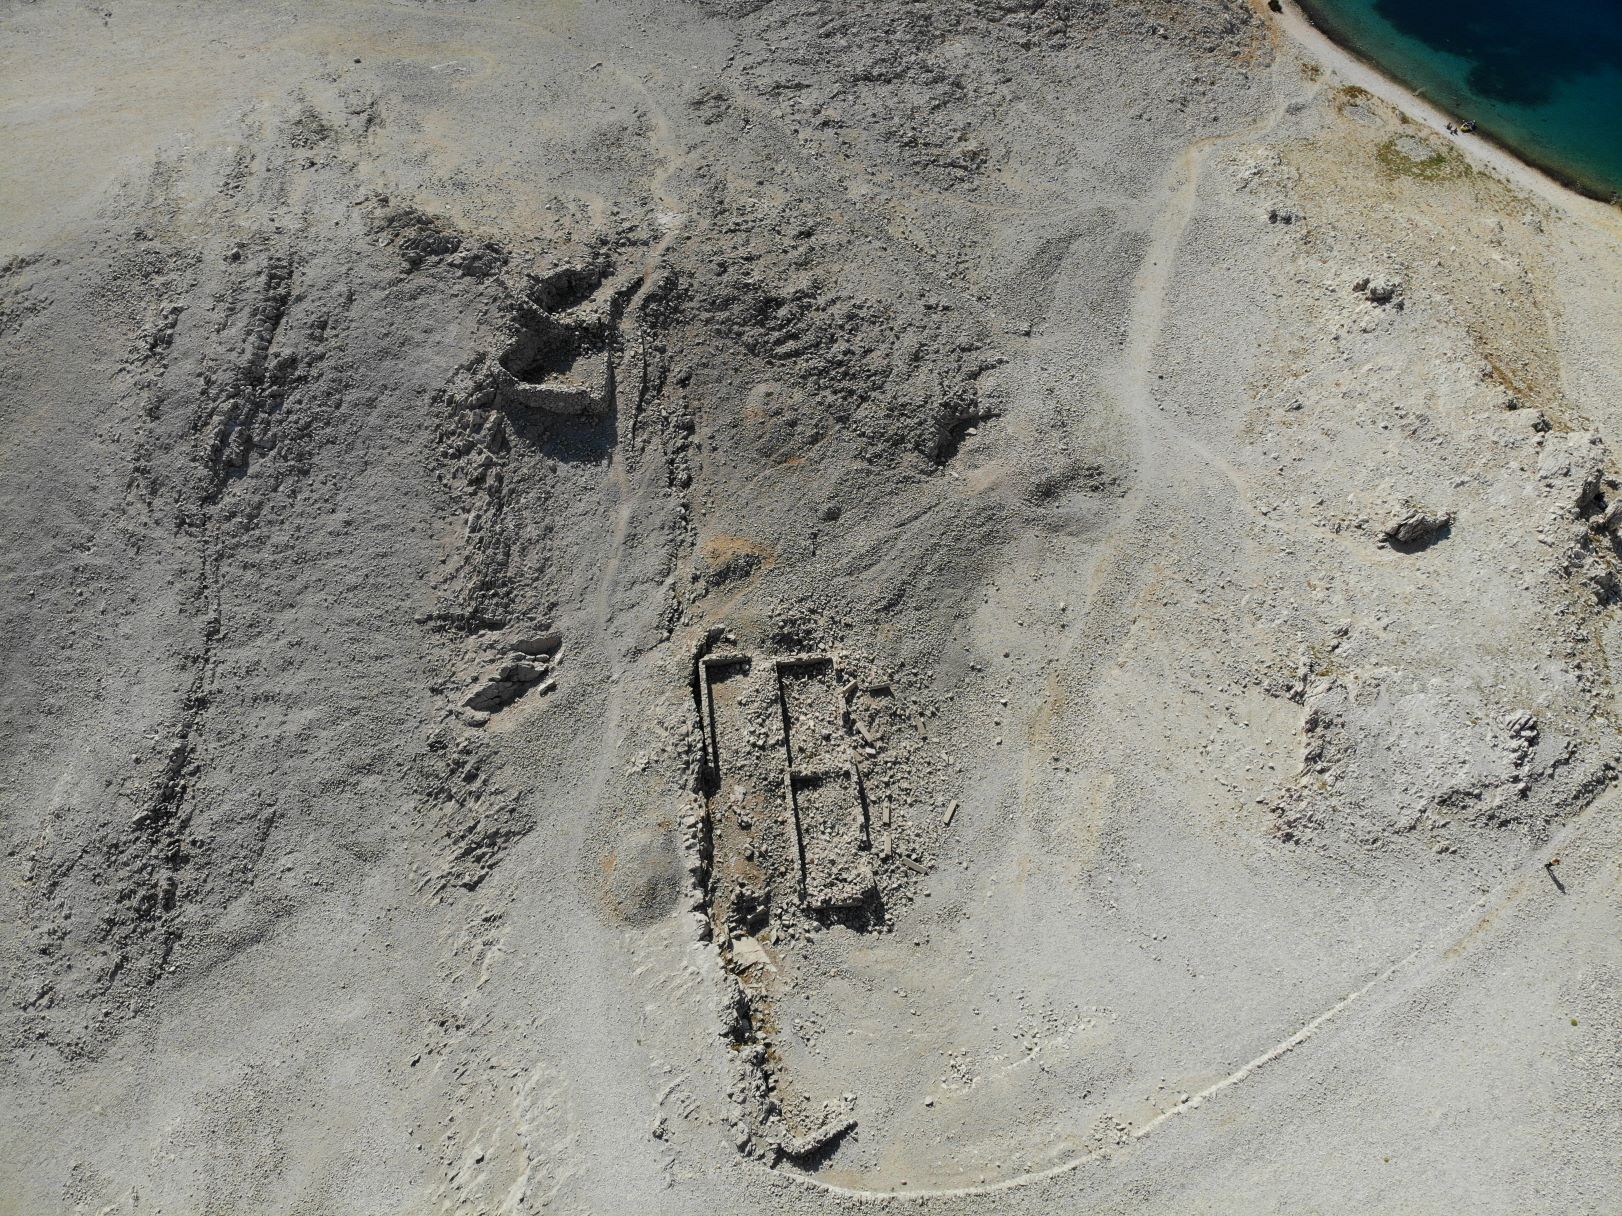 An aerial view of structural remains in rocky terrain. In the top right corner, a blue lake is visible